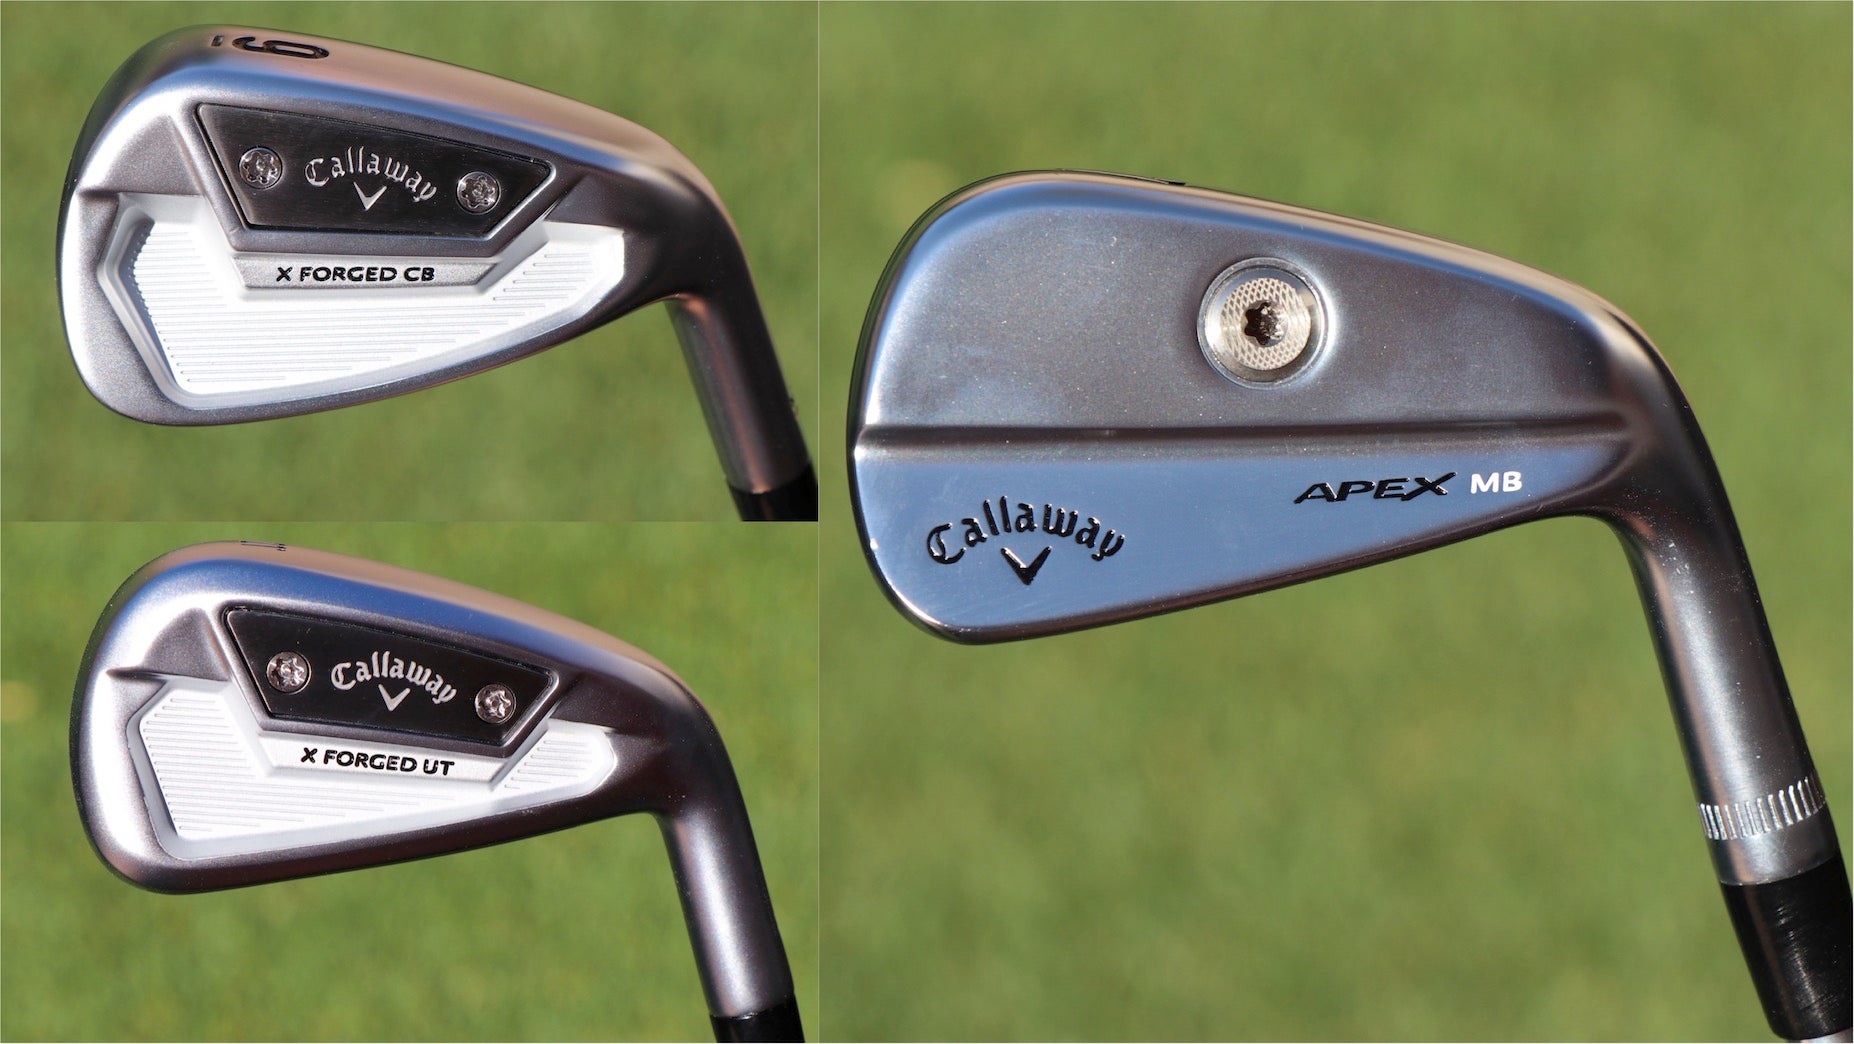 FIRST LOOK: Callaway Apex MB, X Forged CB and X Forged UT irons